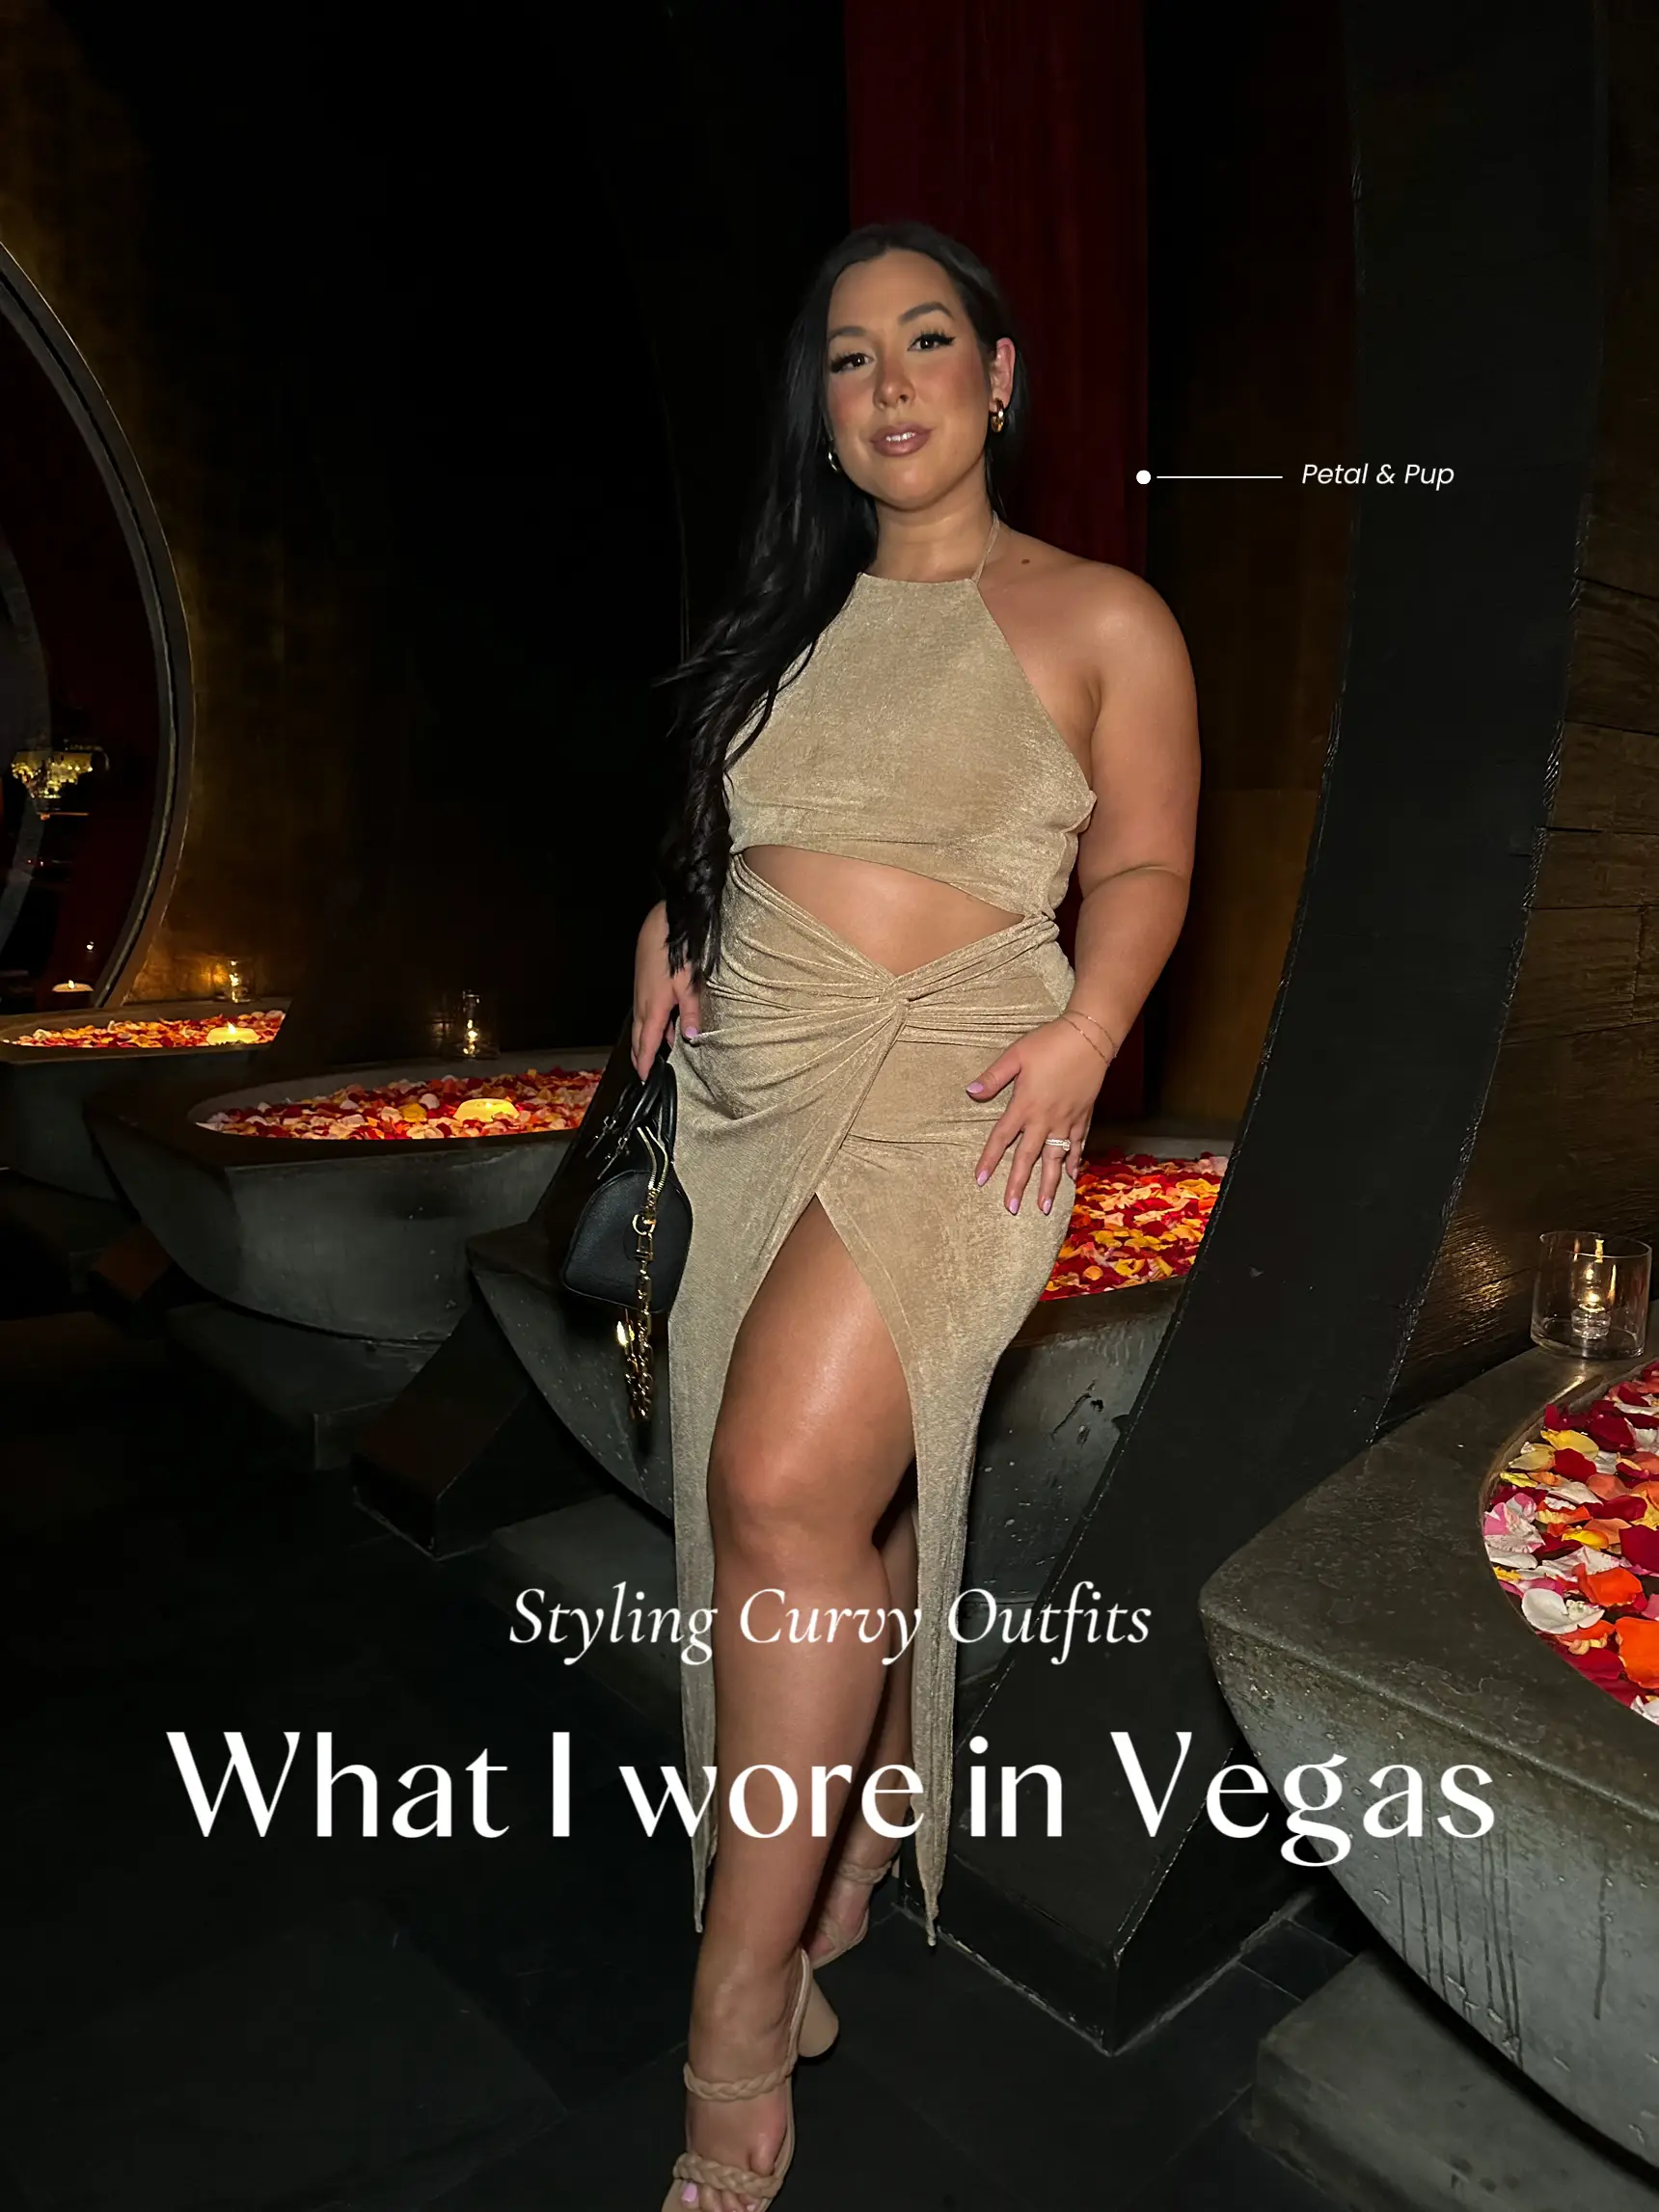 Night out in Vegas: what I wore and where I ate